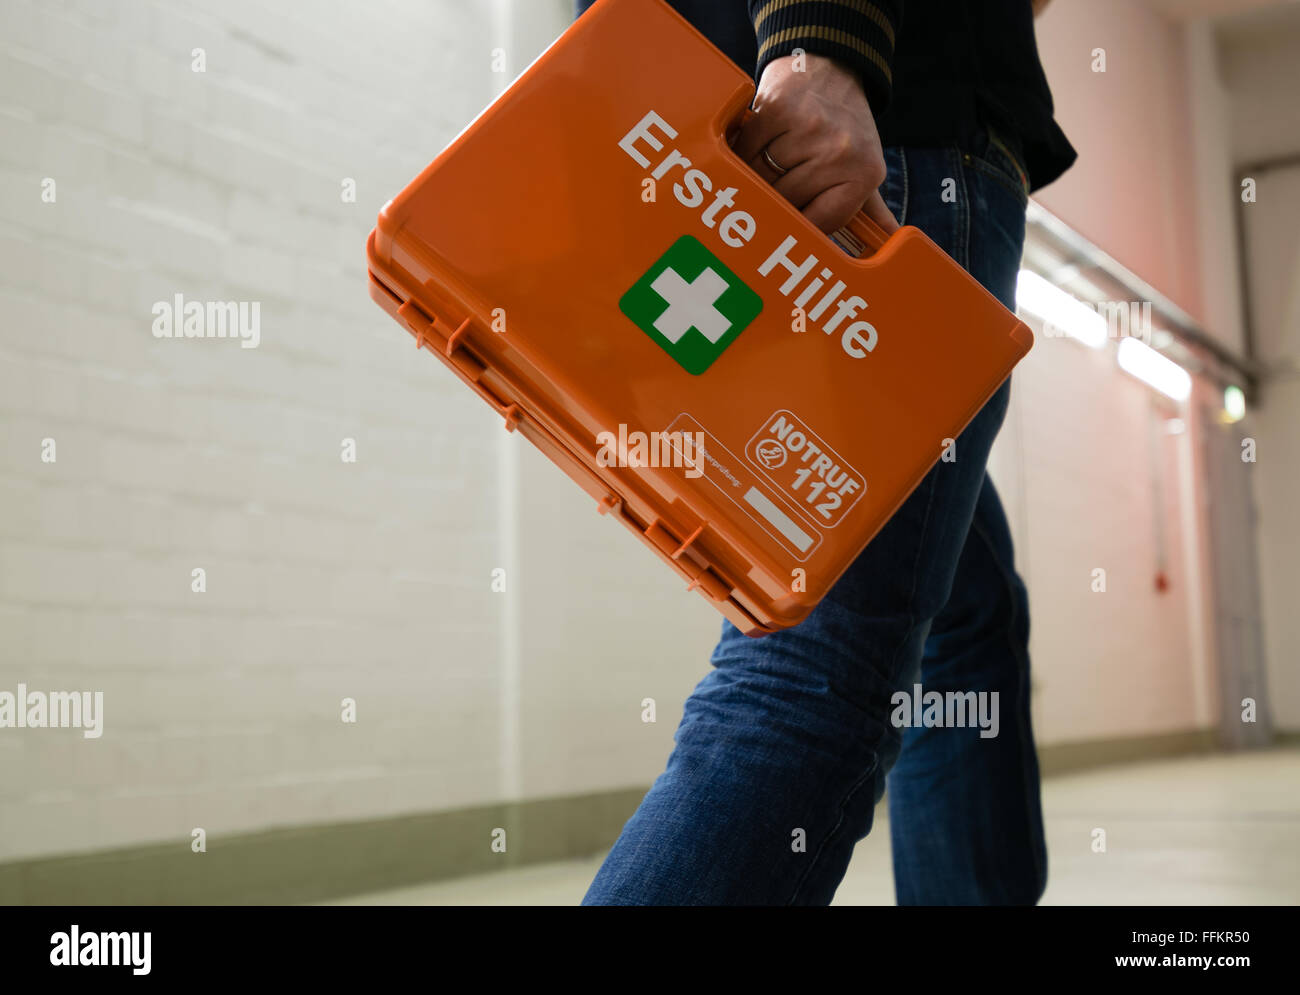 First aid after an accident at work. First responder with first aid kit, Germany. Stock Photo